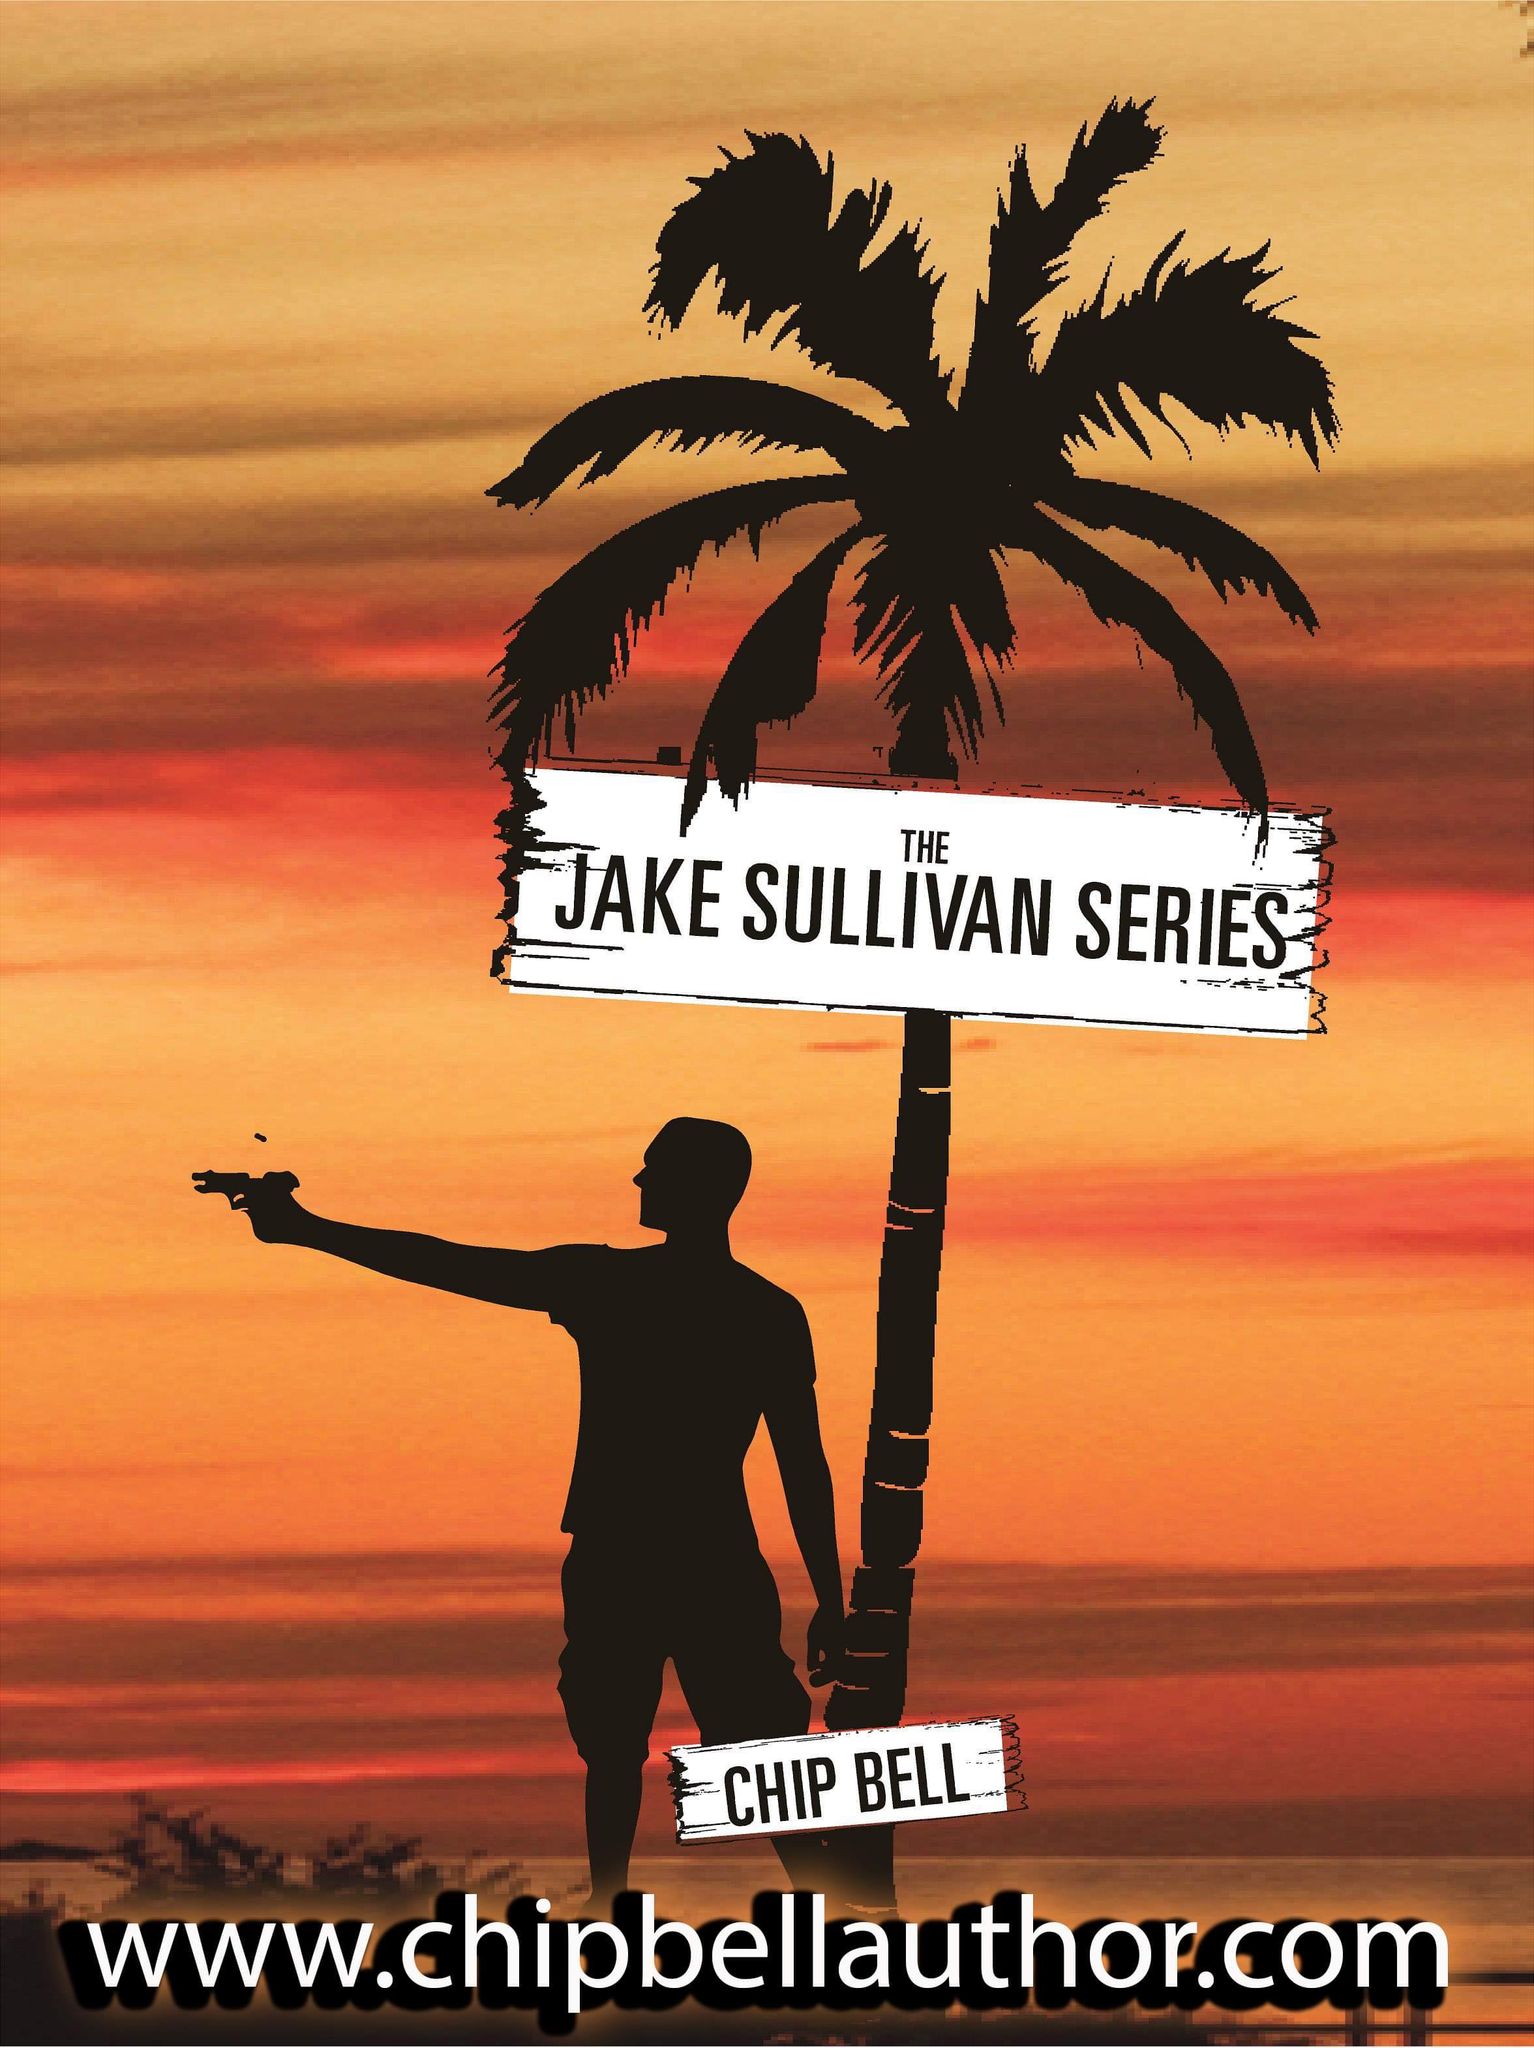 Art for The Jake Sullivan Series by ChipBellAuthor.com